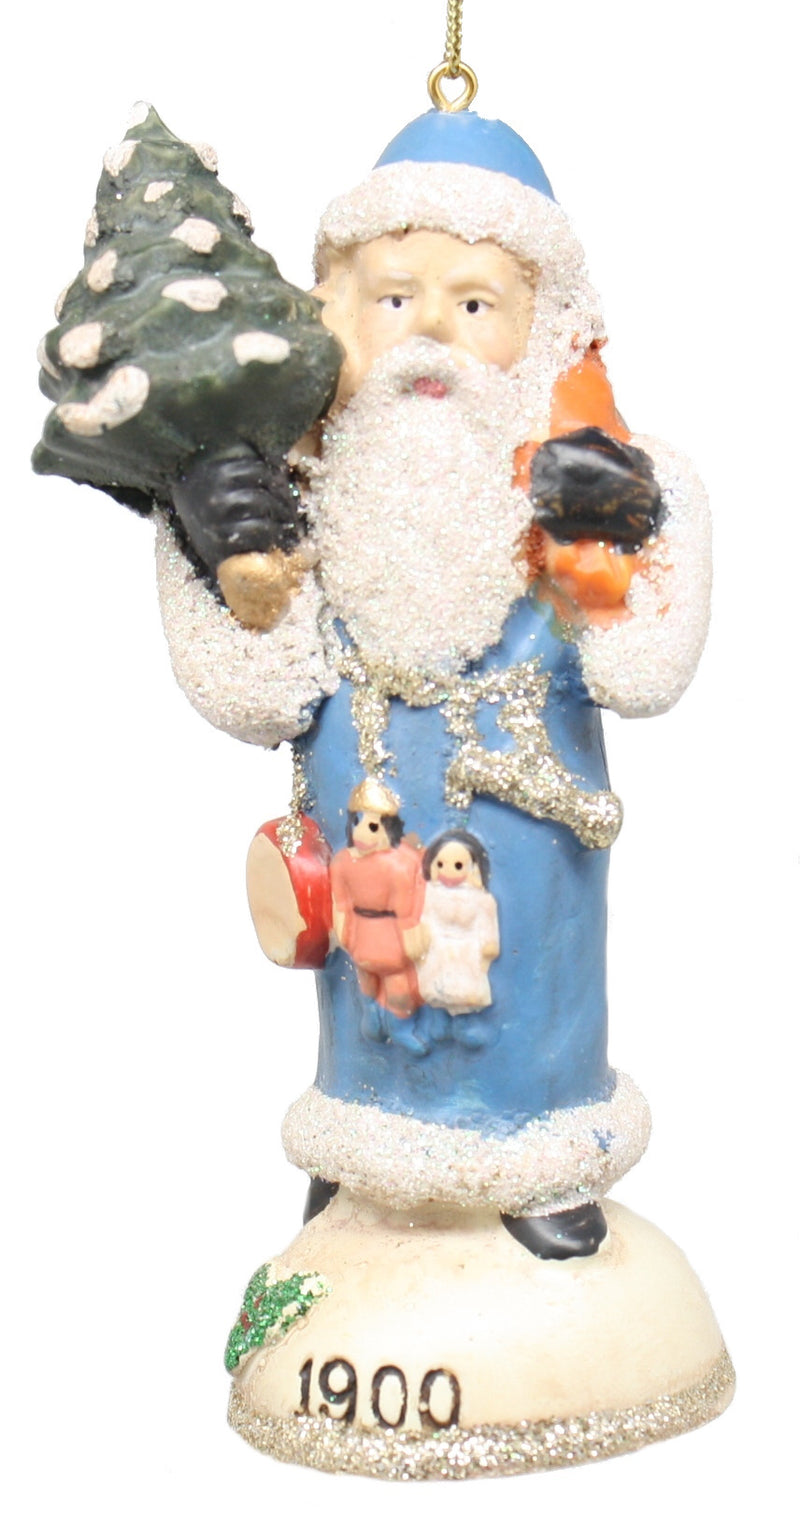 Santa Thru The Ages Ornament - 1900 - The Country Christmas Loft